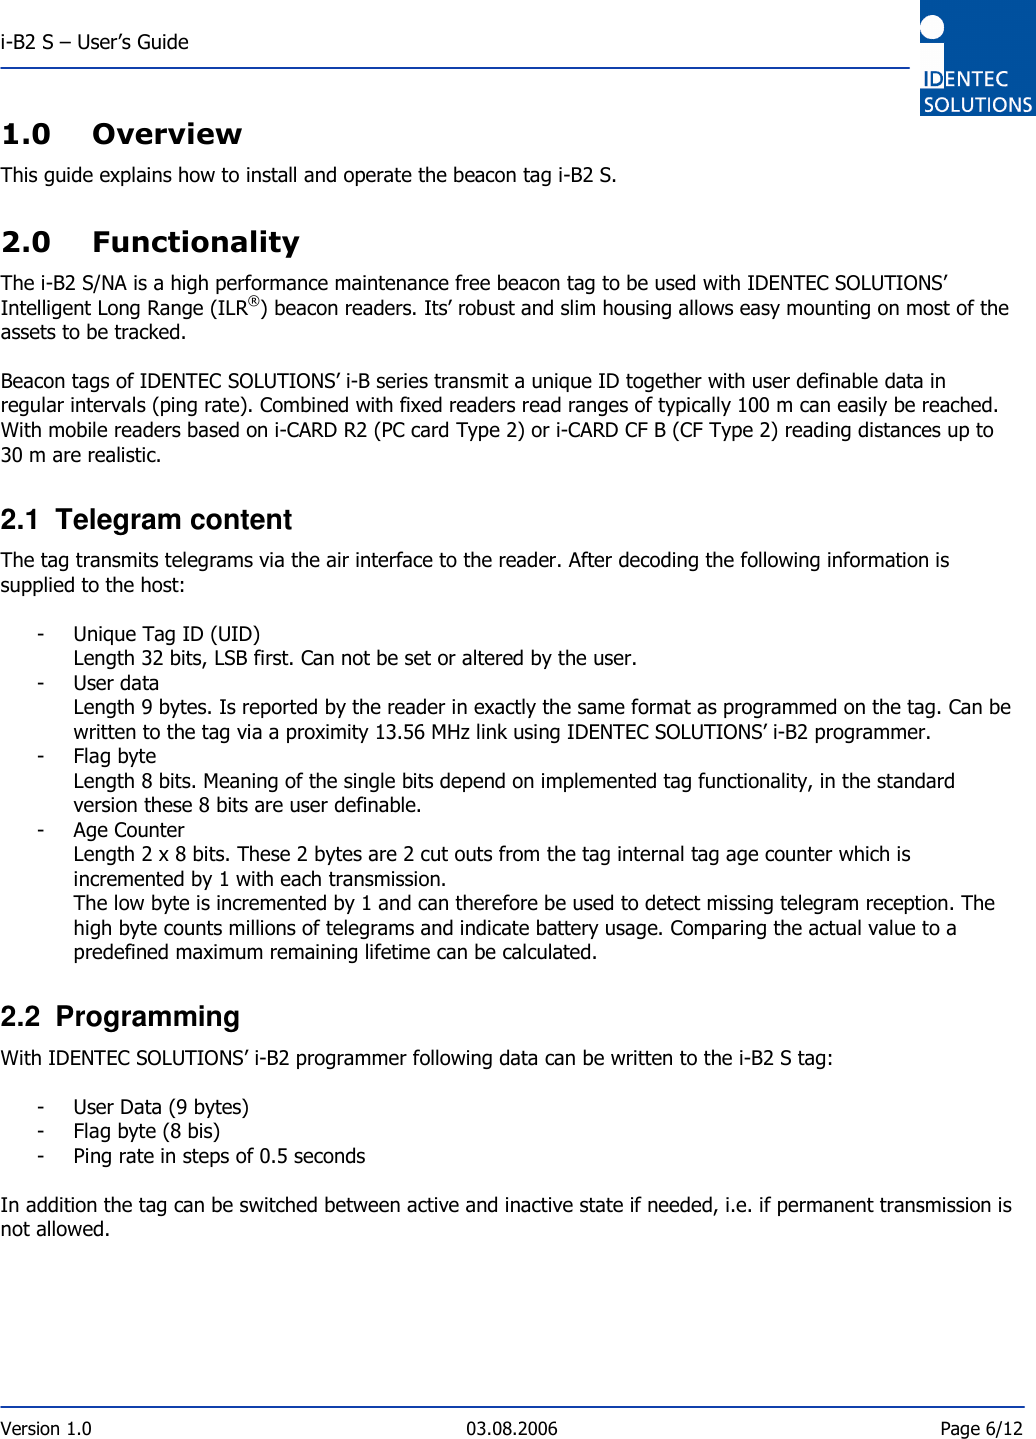  i-B2 S – User’s Guide  Version 1.0  03.08.2006  Page 6/12    1.0 Overview This guide explains how to install and operate the beacon tag i-B2 S.  2.0 Functionality The i-B2 S/NA is a high performance maintenance free beacon tag to be used with IDENTEC SOLUTIONS’ Intelligent Long Range (ILR®) beacon readers. Its’ robust and slim housing allows easy mounting on most of the assets to be tracked.   Beacon tags of IDENTEC SOLUTIONS’ i-B series transmit a unique ID together with user definable data in regular intervals (ping rate). Combined with fixed readers read ranges of typically 100 m can easily be reached. With mobile readers based on i-CARD R2 (PC card Type 2) or i-CARD CF B (CF Type 2) reading distances up to 30 m are realistic.  2.1  Telegram content The tag transmits telegrams via the air interface to the reader. After decoding the following information is supplied to the host:  - Unique Tag ID (UID) Length 32 bits, LSB first. Can not be set or altered by the user. - User data Length 9 bytes. Is reported by the reader in exactly the same format as programmed on the tag. Can be written to the tag via a proximity 13.56 MHz link using IDENTEC SOLUTIONS’ i-B2 programmer. - Flag byte Length 8 bits. Meaning of the single bits depend on implemented tag functionality, in the standard version these 8 bits are user definable. - Age Counter Length 2 x 8 bits. These 2 bytes are 2 cut outs from the tag internal tag age counter which is incremented by 1 with each transmission. The low byte is incremented by 1 and can therefore be used to detect missing telegram reception. The high byte counts millions of telegrams and indicate battery usage. Comparing the actual value to a predefined maximum remaining lifetime can be calculated.  2.2  Programming With IDENTEC SOLUTIONS’ i-B2 programmer following data can be written to the i-B2 S tag:  - User Data (9 bytes) - Flag byte (8 bis) - Ping rate in steps of 0.5 seconds  In addition the tag can be switched between active and inactive state if needed, i.e. if permanent transmission is not allowed.  